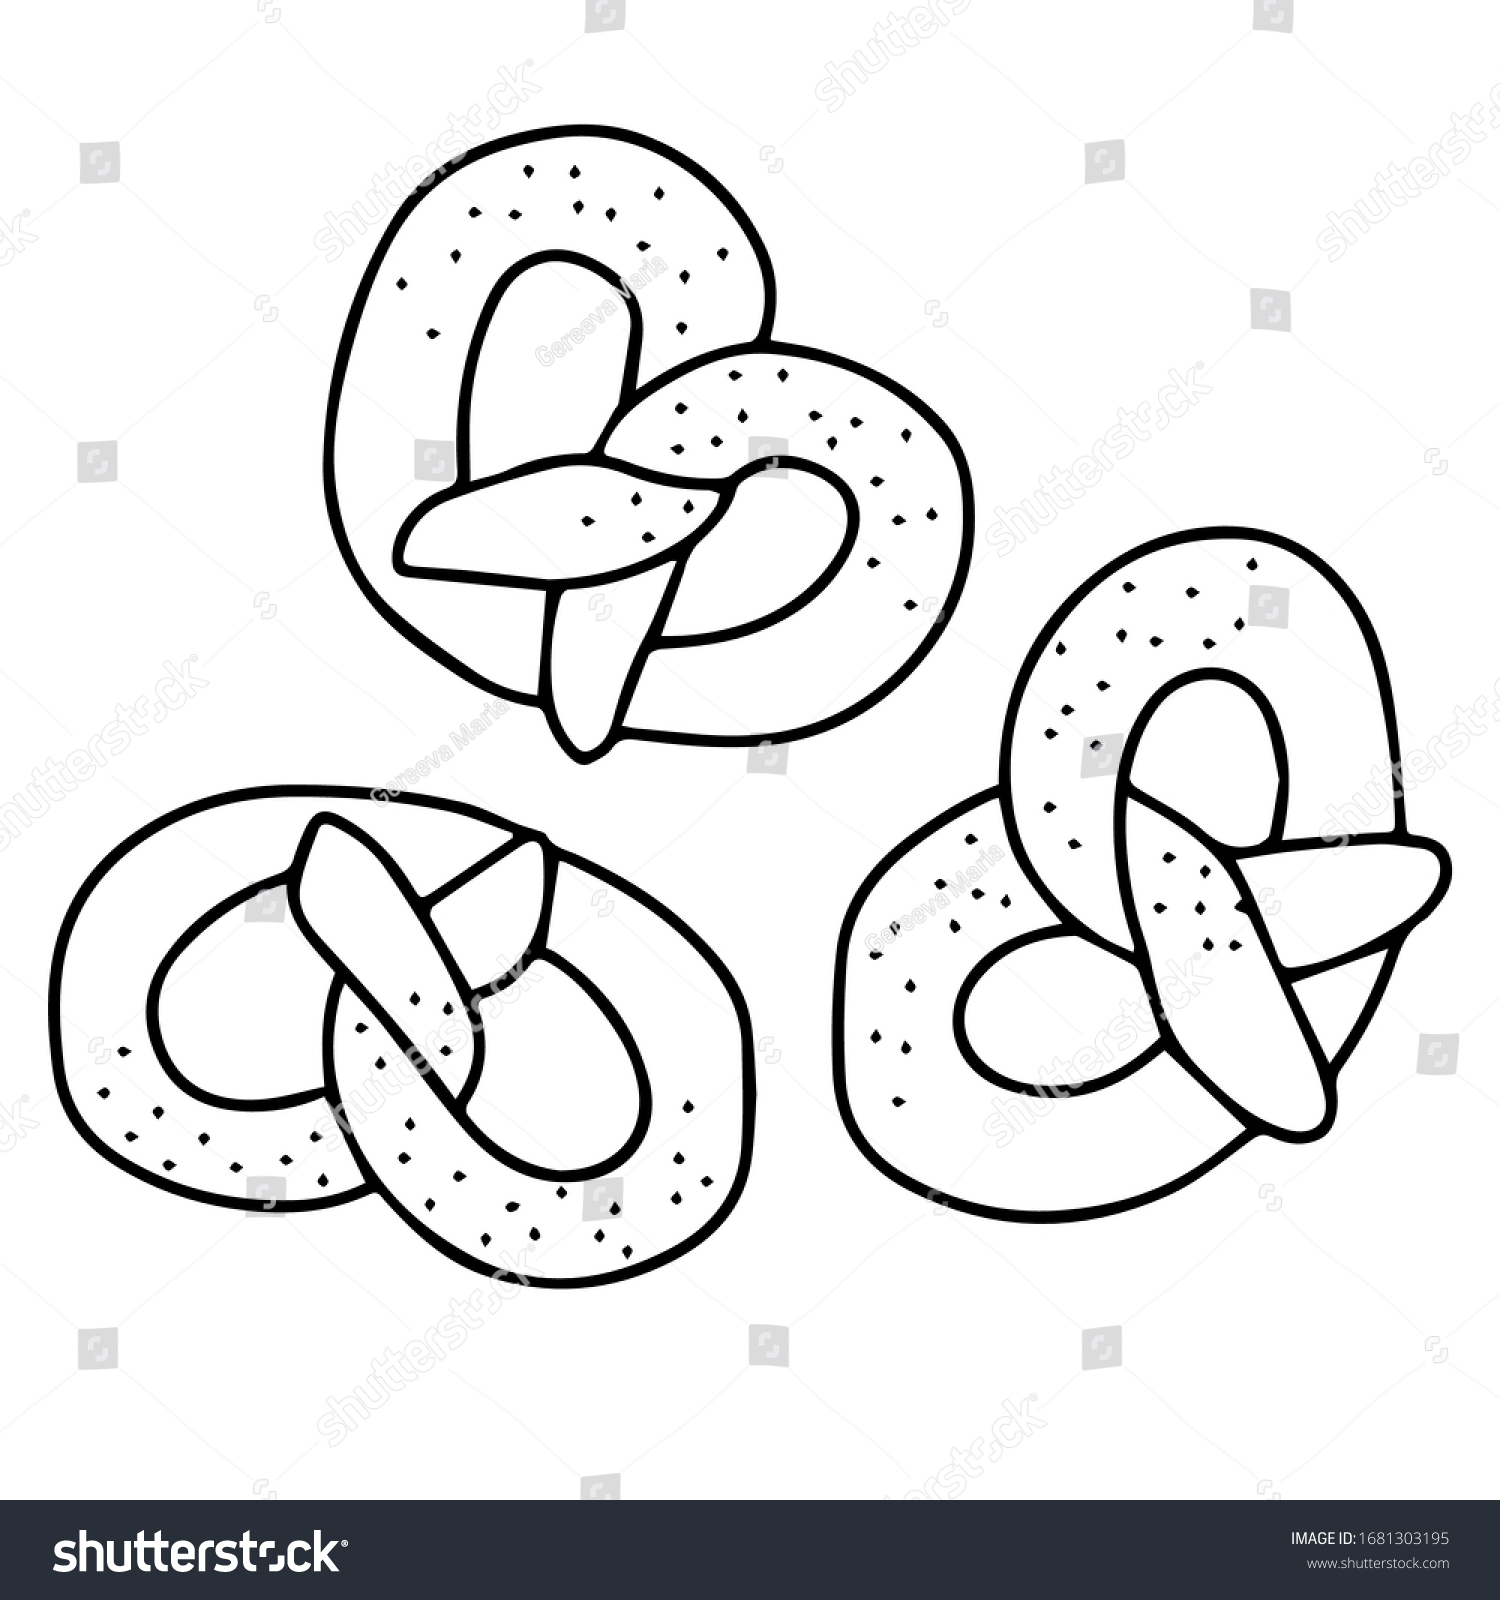 Pretzel vector line icon twisted saltbakery stock vector royalty free